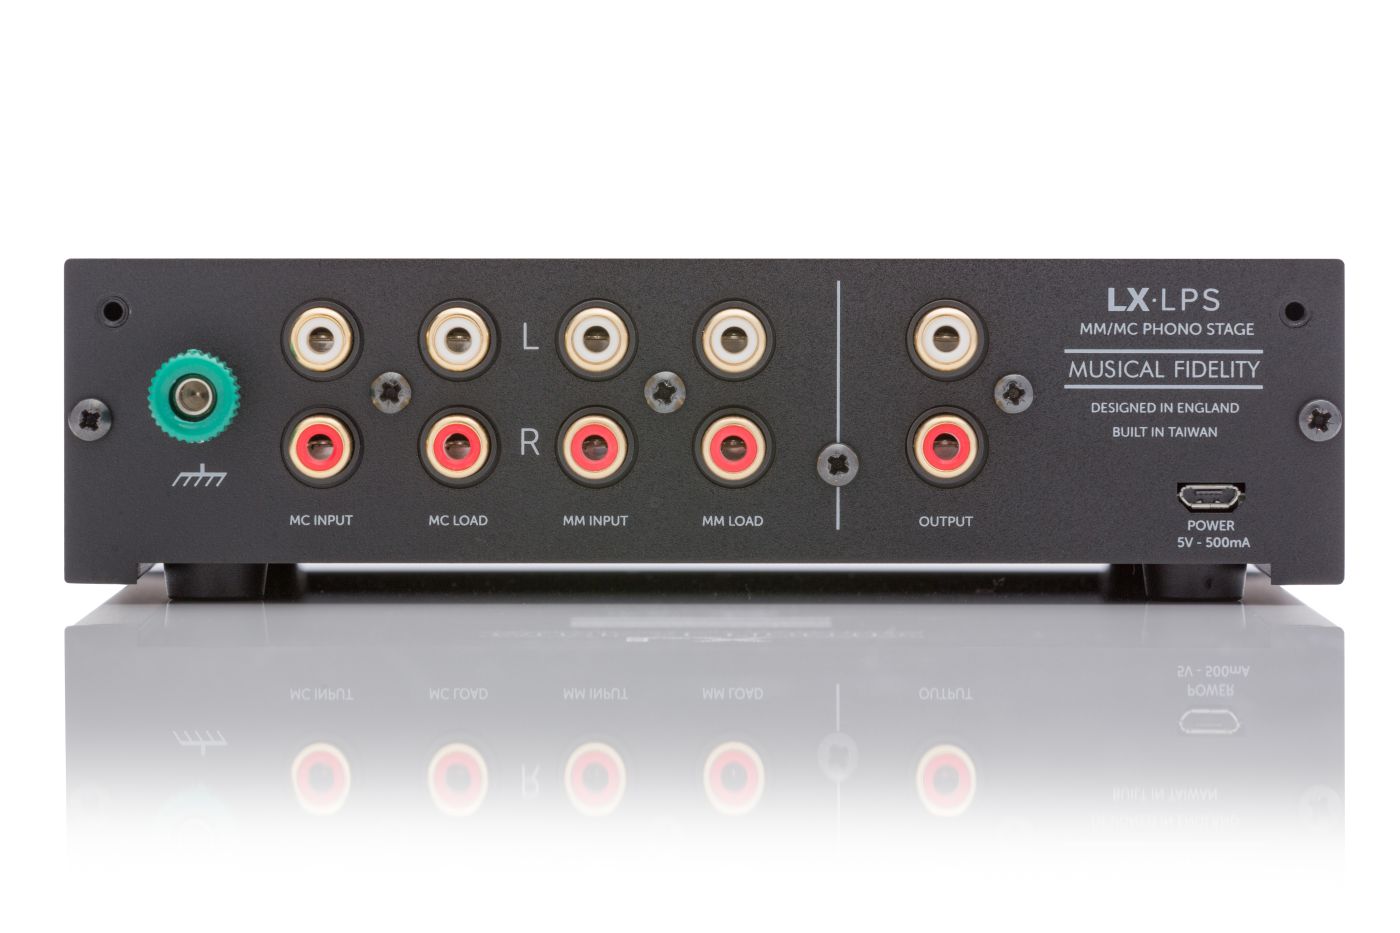 Musical Fidelity LX-LPS